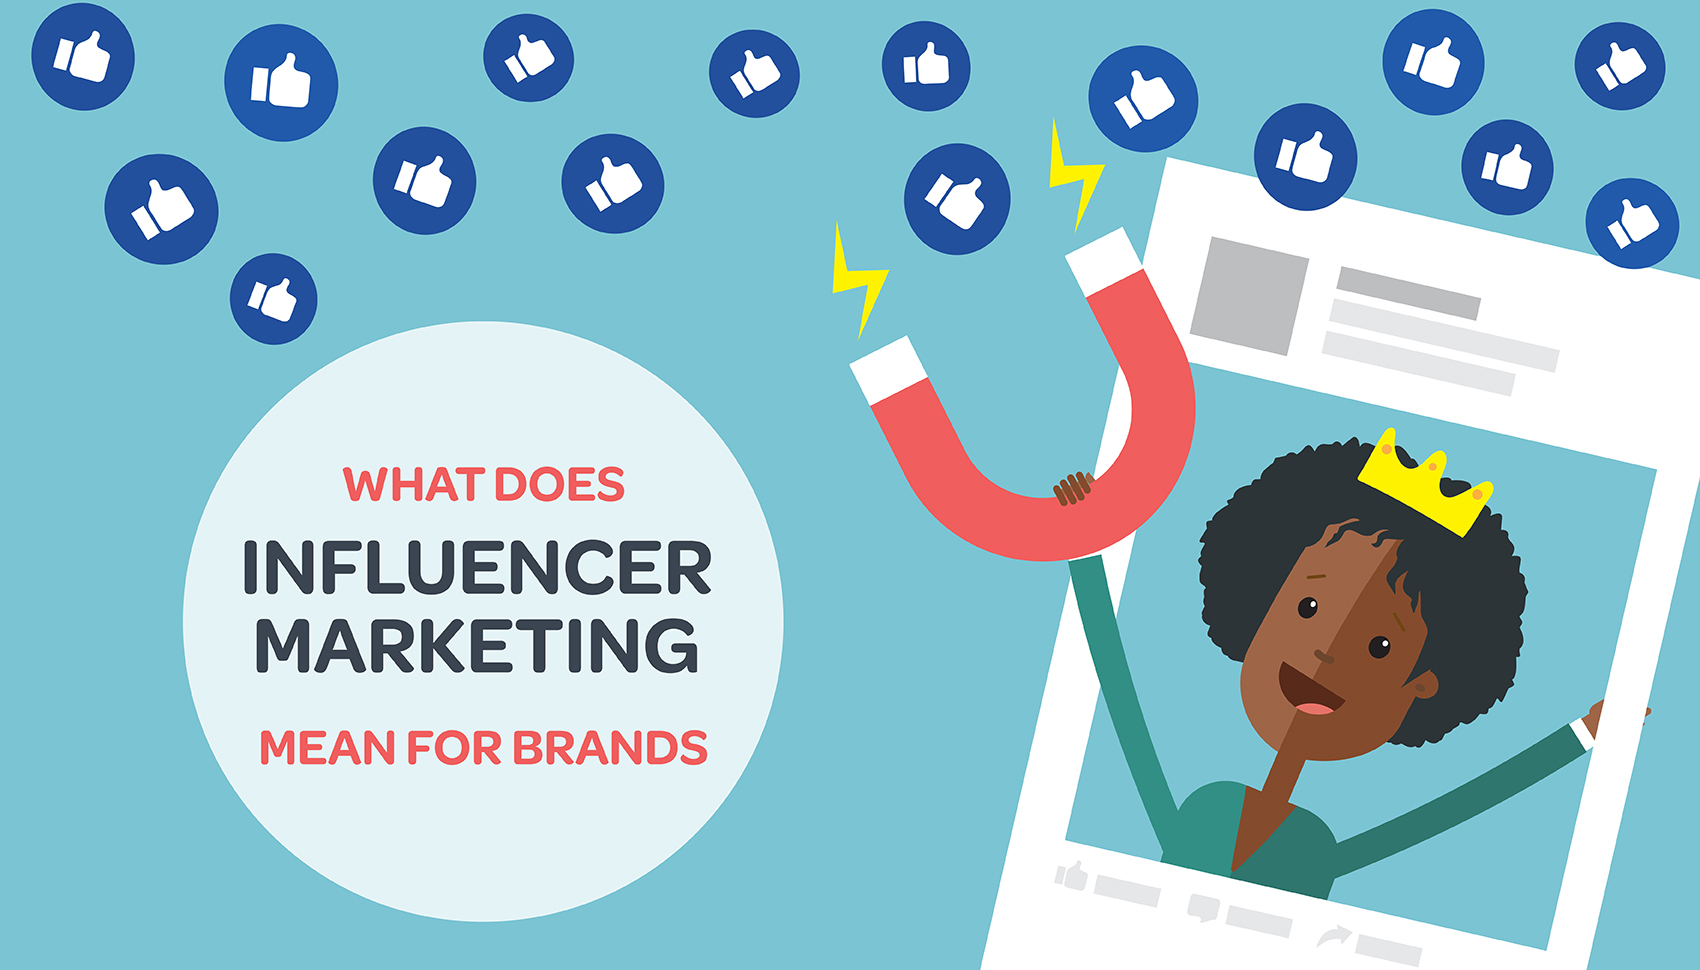 What does influencer marketing mean for brands?